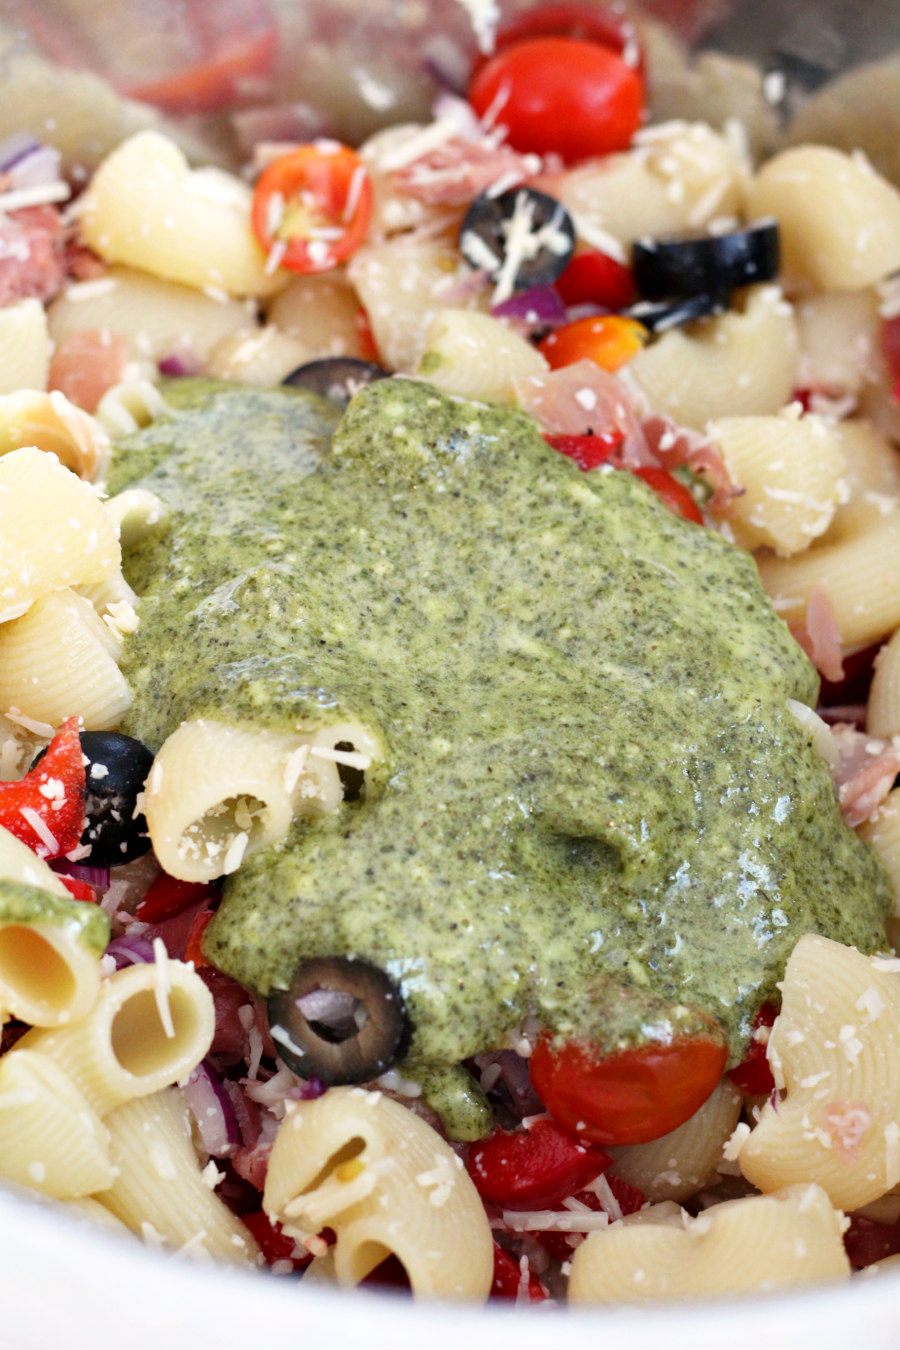 Chiocciole pasta in a mixing bowl with red bell pepper, onion, olives, grape tomatoes, and prosciutto with shredded Parmesan cheese and basil pesto.